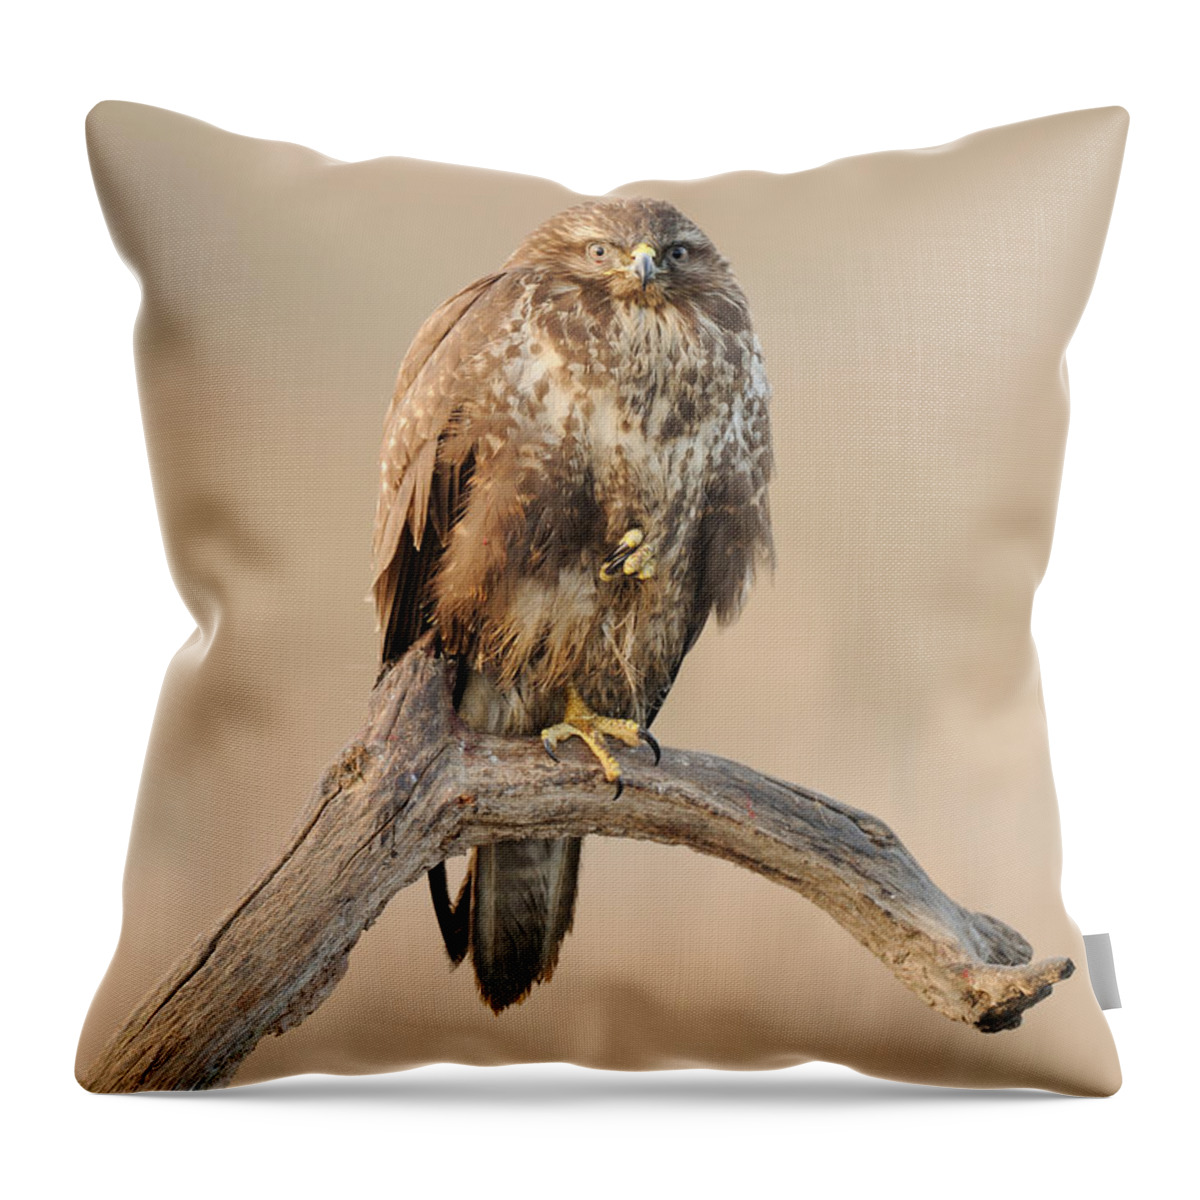 Common Buzzard Throw Pillow featuring the photograph Common Buzzard #1 by Dr. Rainer Herzog